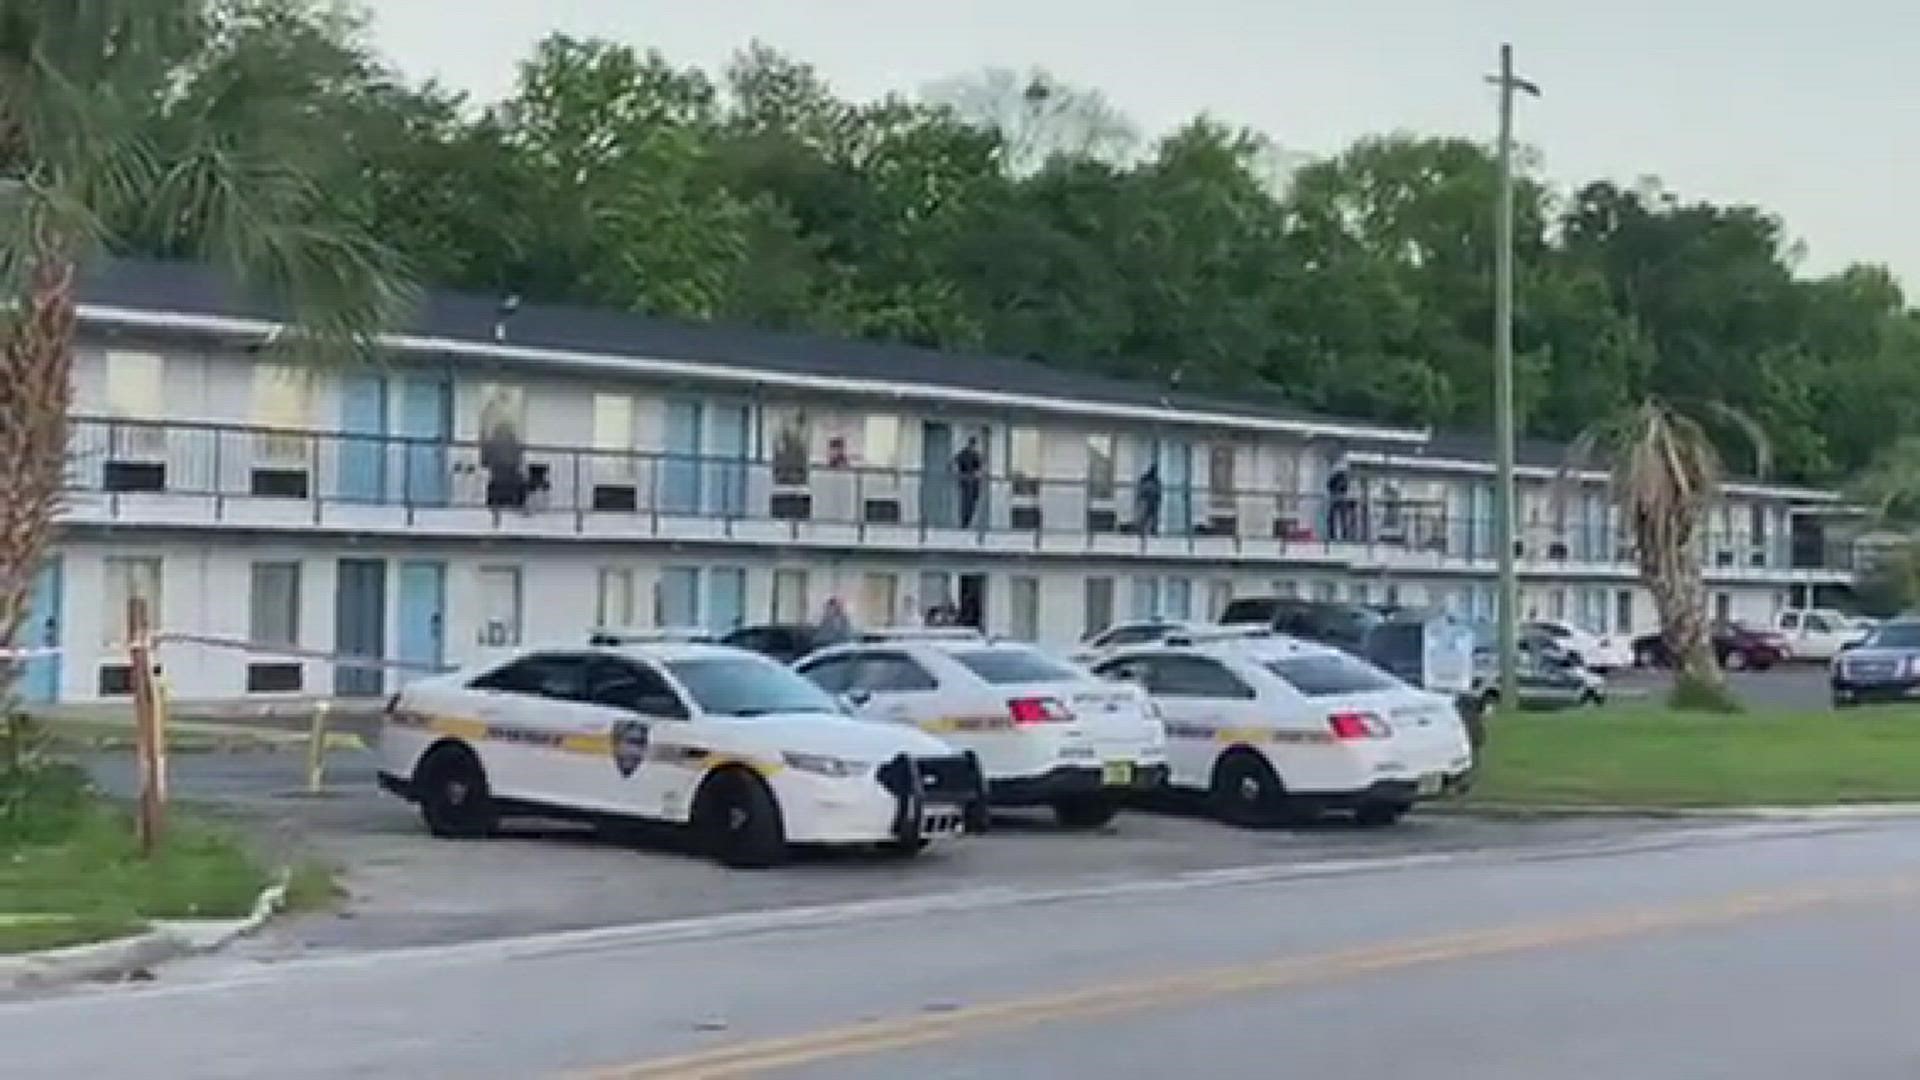 The Jacksonville Sheriff's Office responded to the America's Best Value Inn on Dix Ellis Trail around 4 a.m. for a reported shooting.